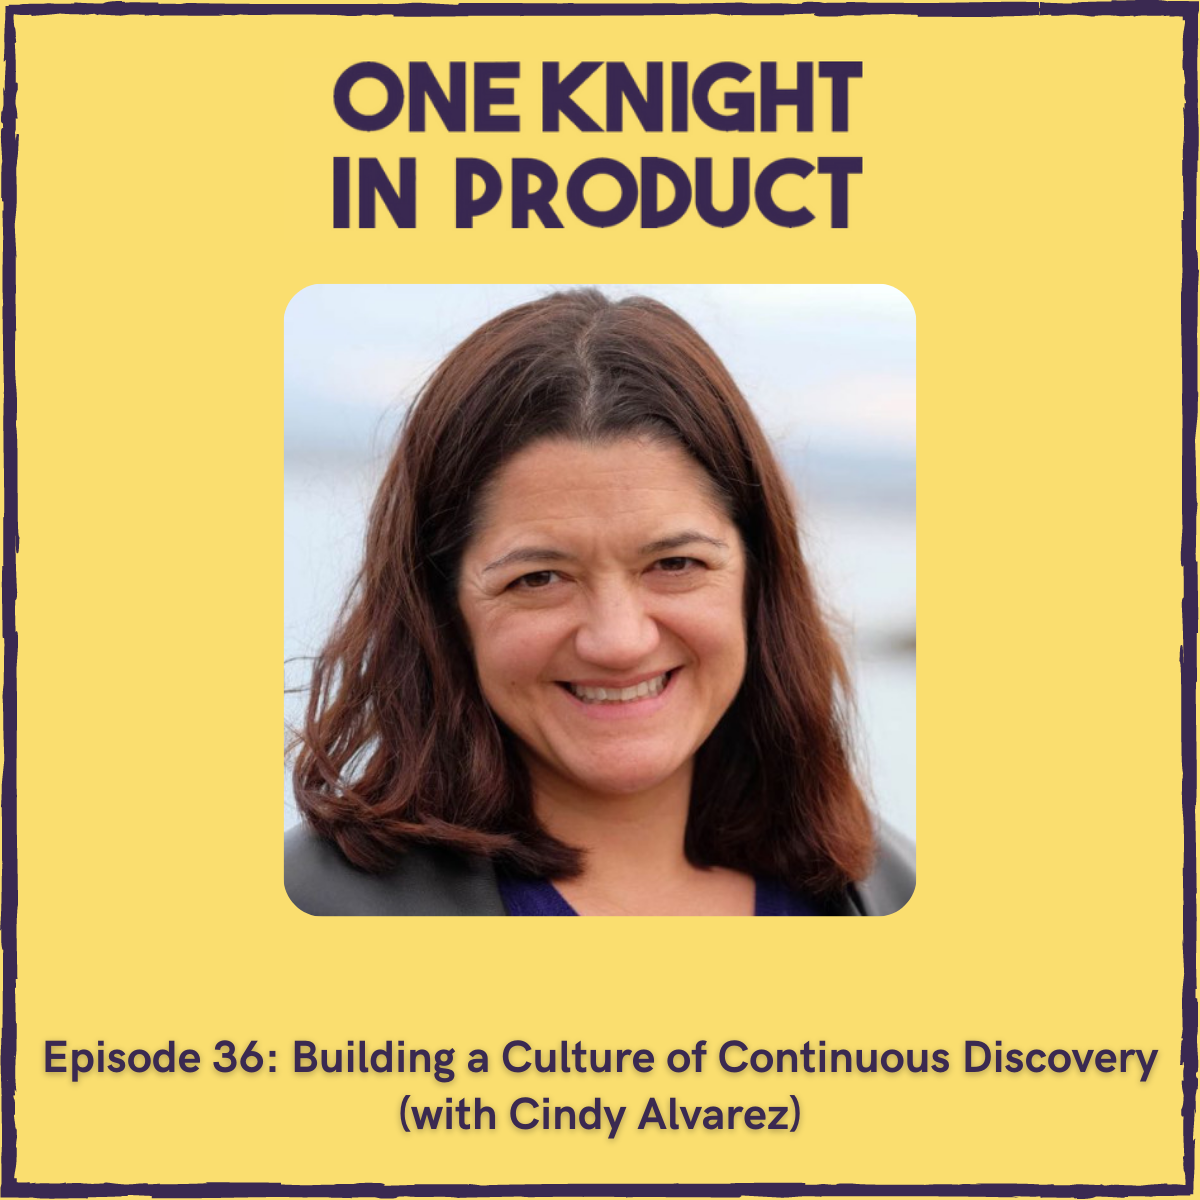 Building a Culture of Continuous Discovery (with Cindy Alvarez, Author "Lean Customer Development" & Director Customer Research @ GitHub)